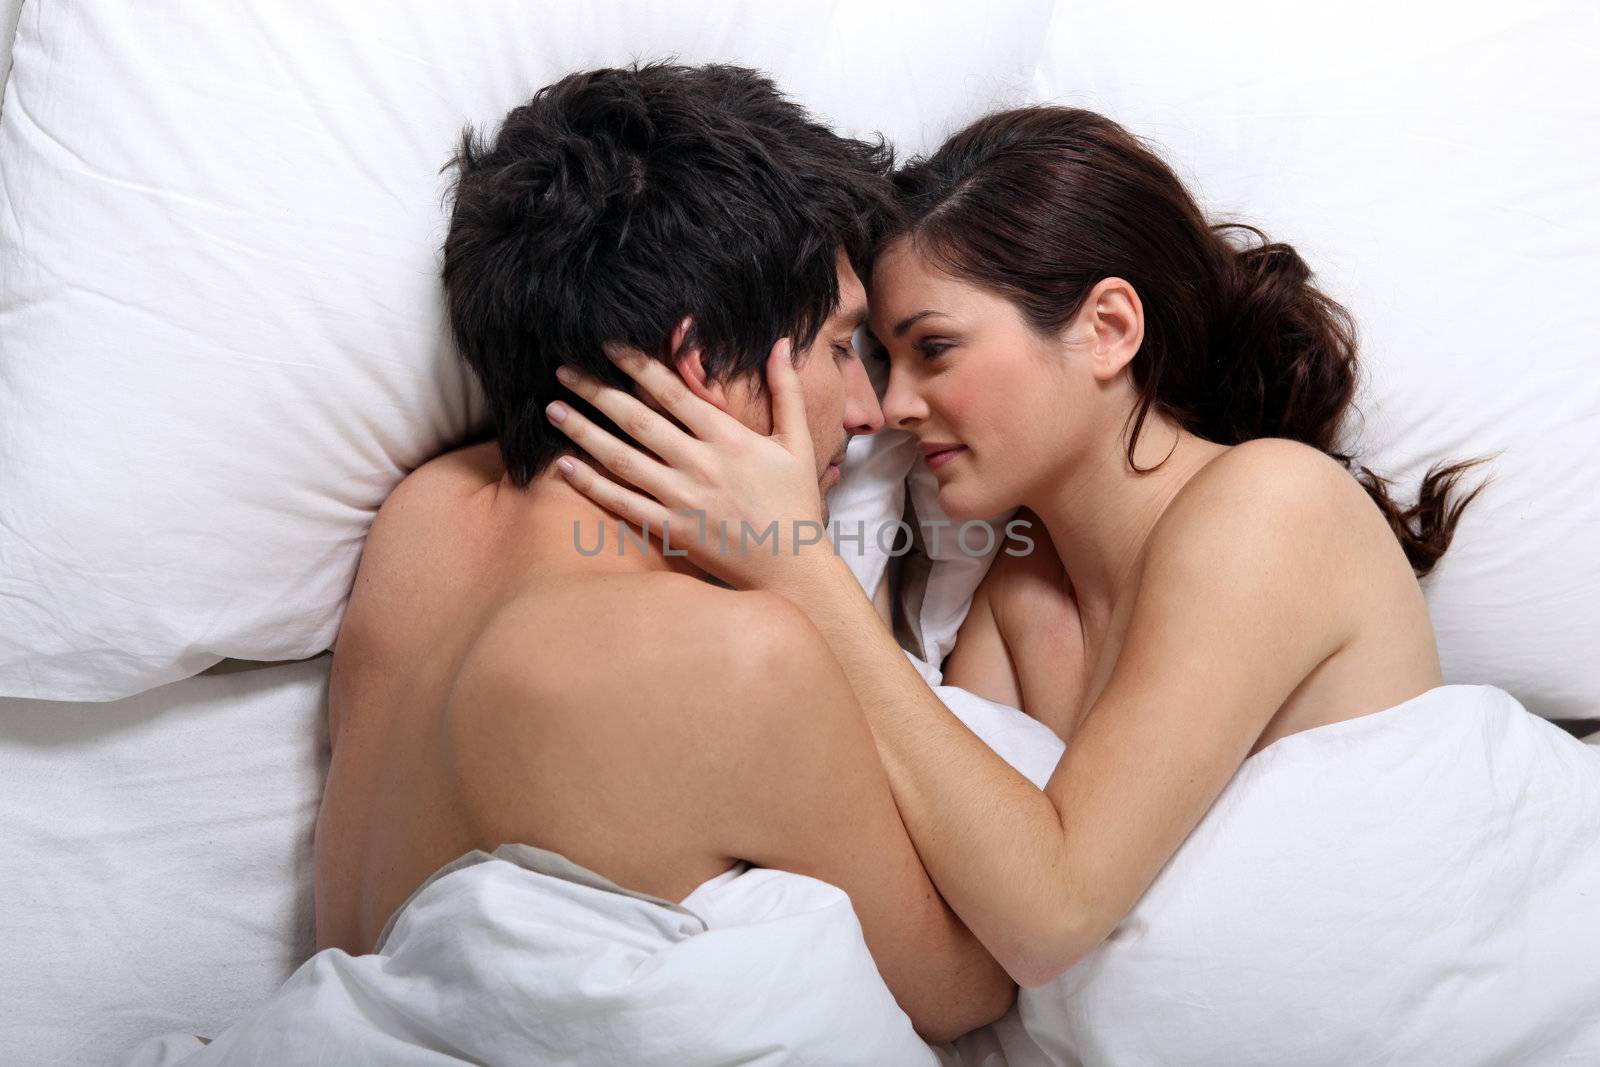 Affectionate couple kissing in bed by phovoir